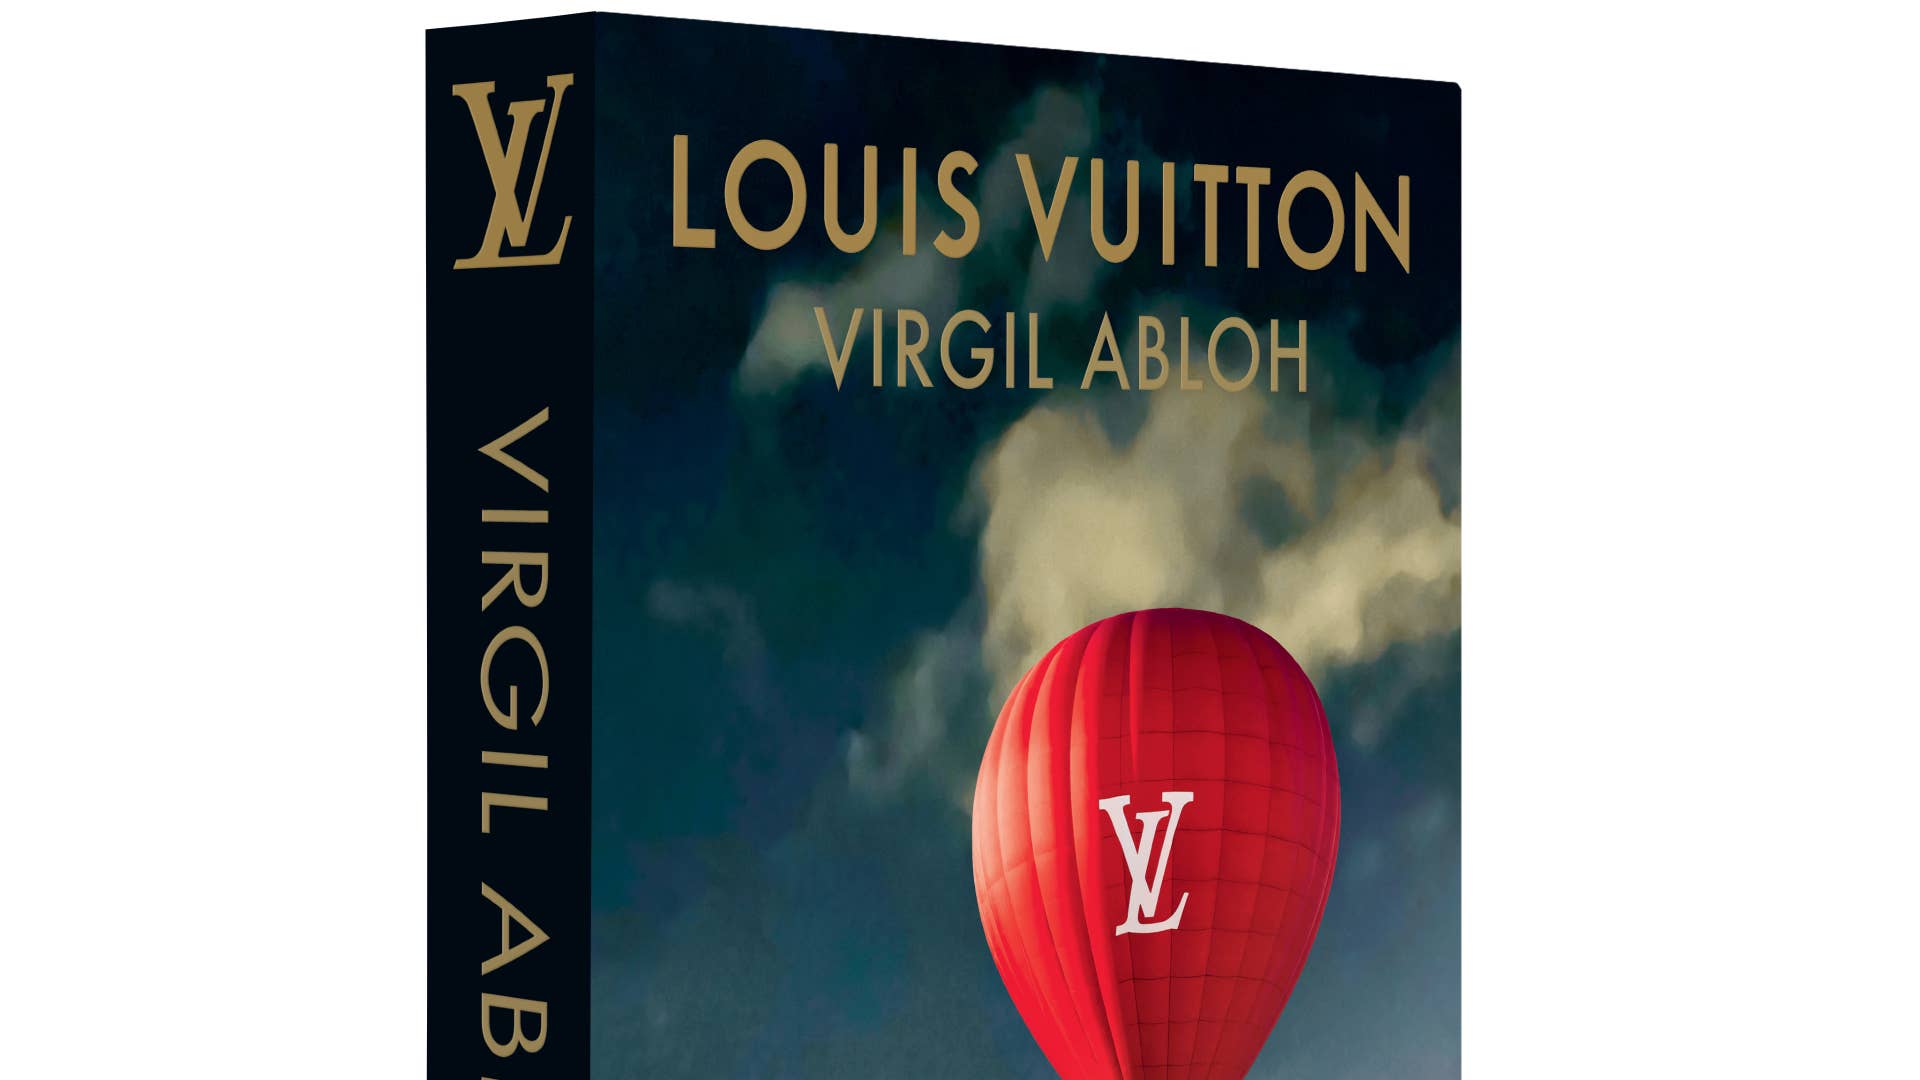 Louis Vuitton news and features